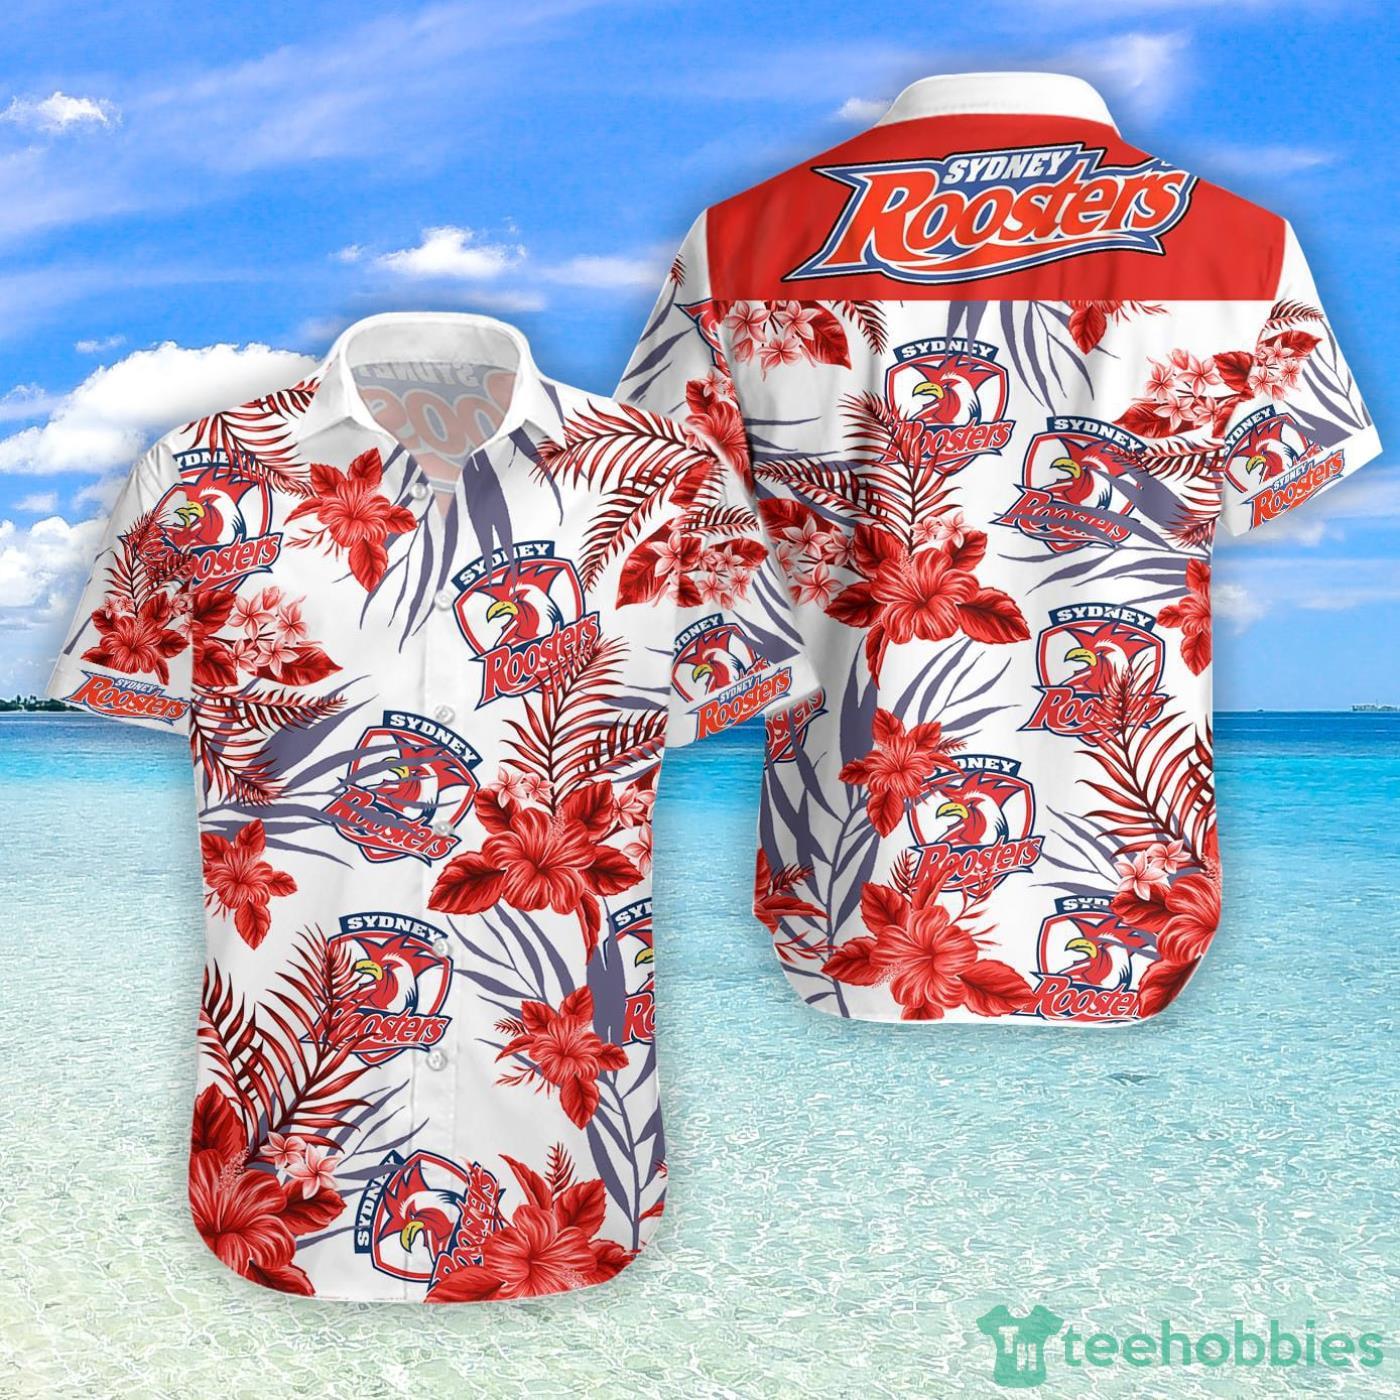 Sydney Roosters Tropical Flower Hawaiian Shirt For Fans